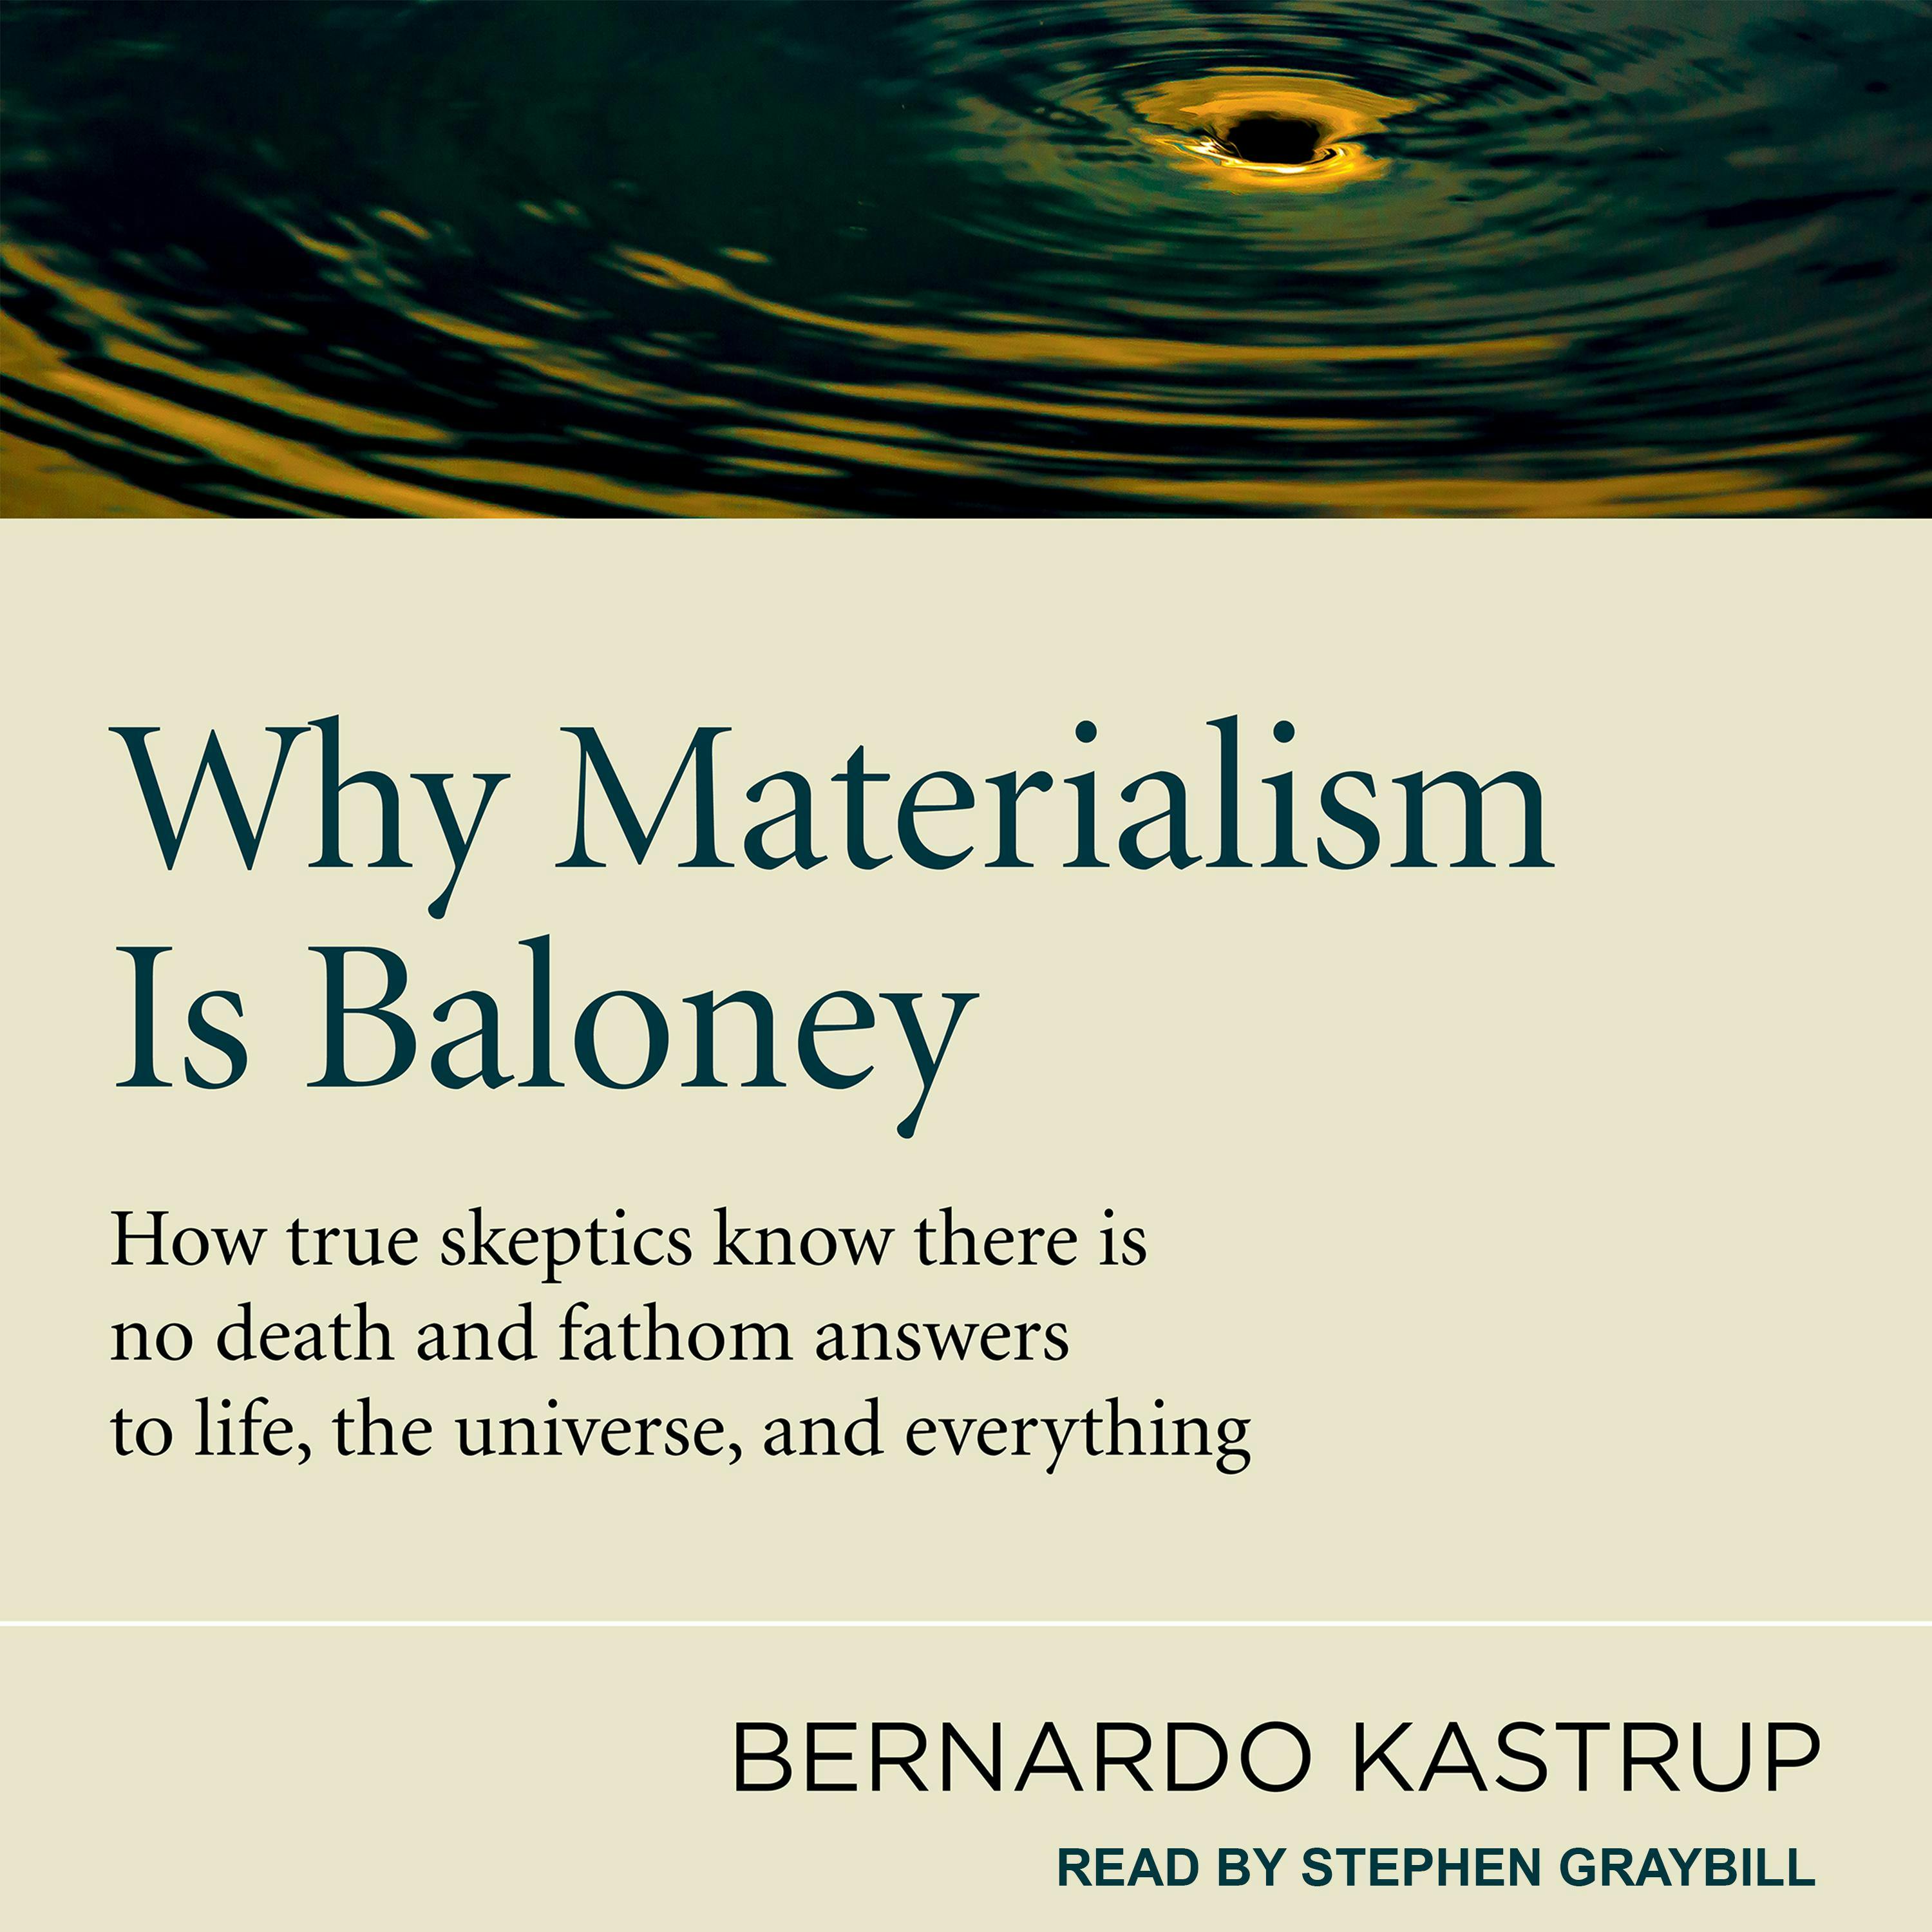 Why Materialism Is Baloney: How True Skeptics Know There Is No Death and Fathom Answers to life, the Universe, and Everything - Bernardo Kastrup